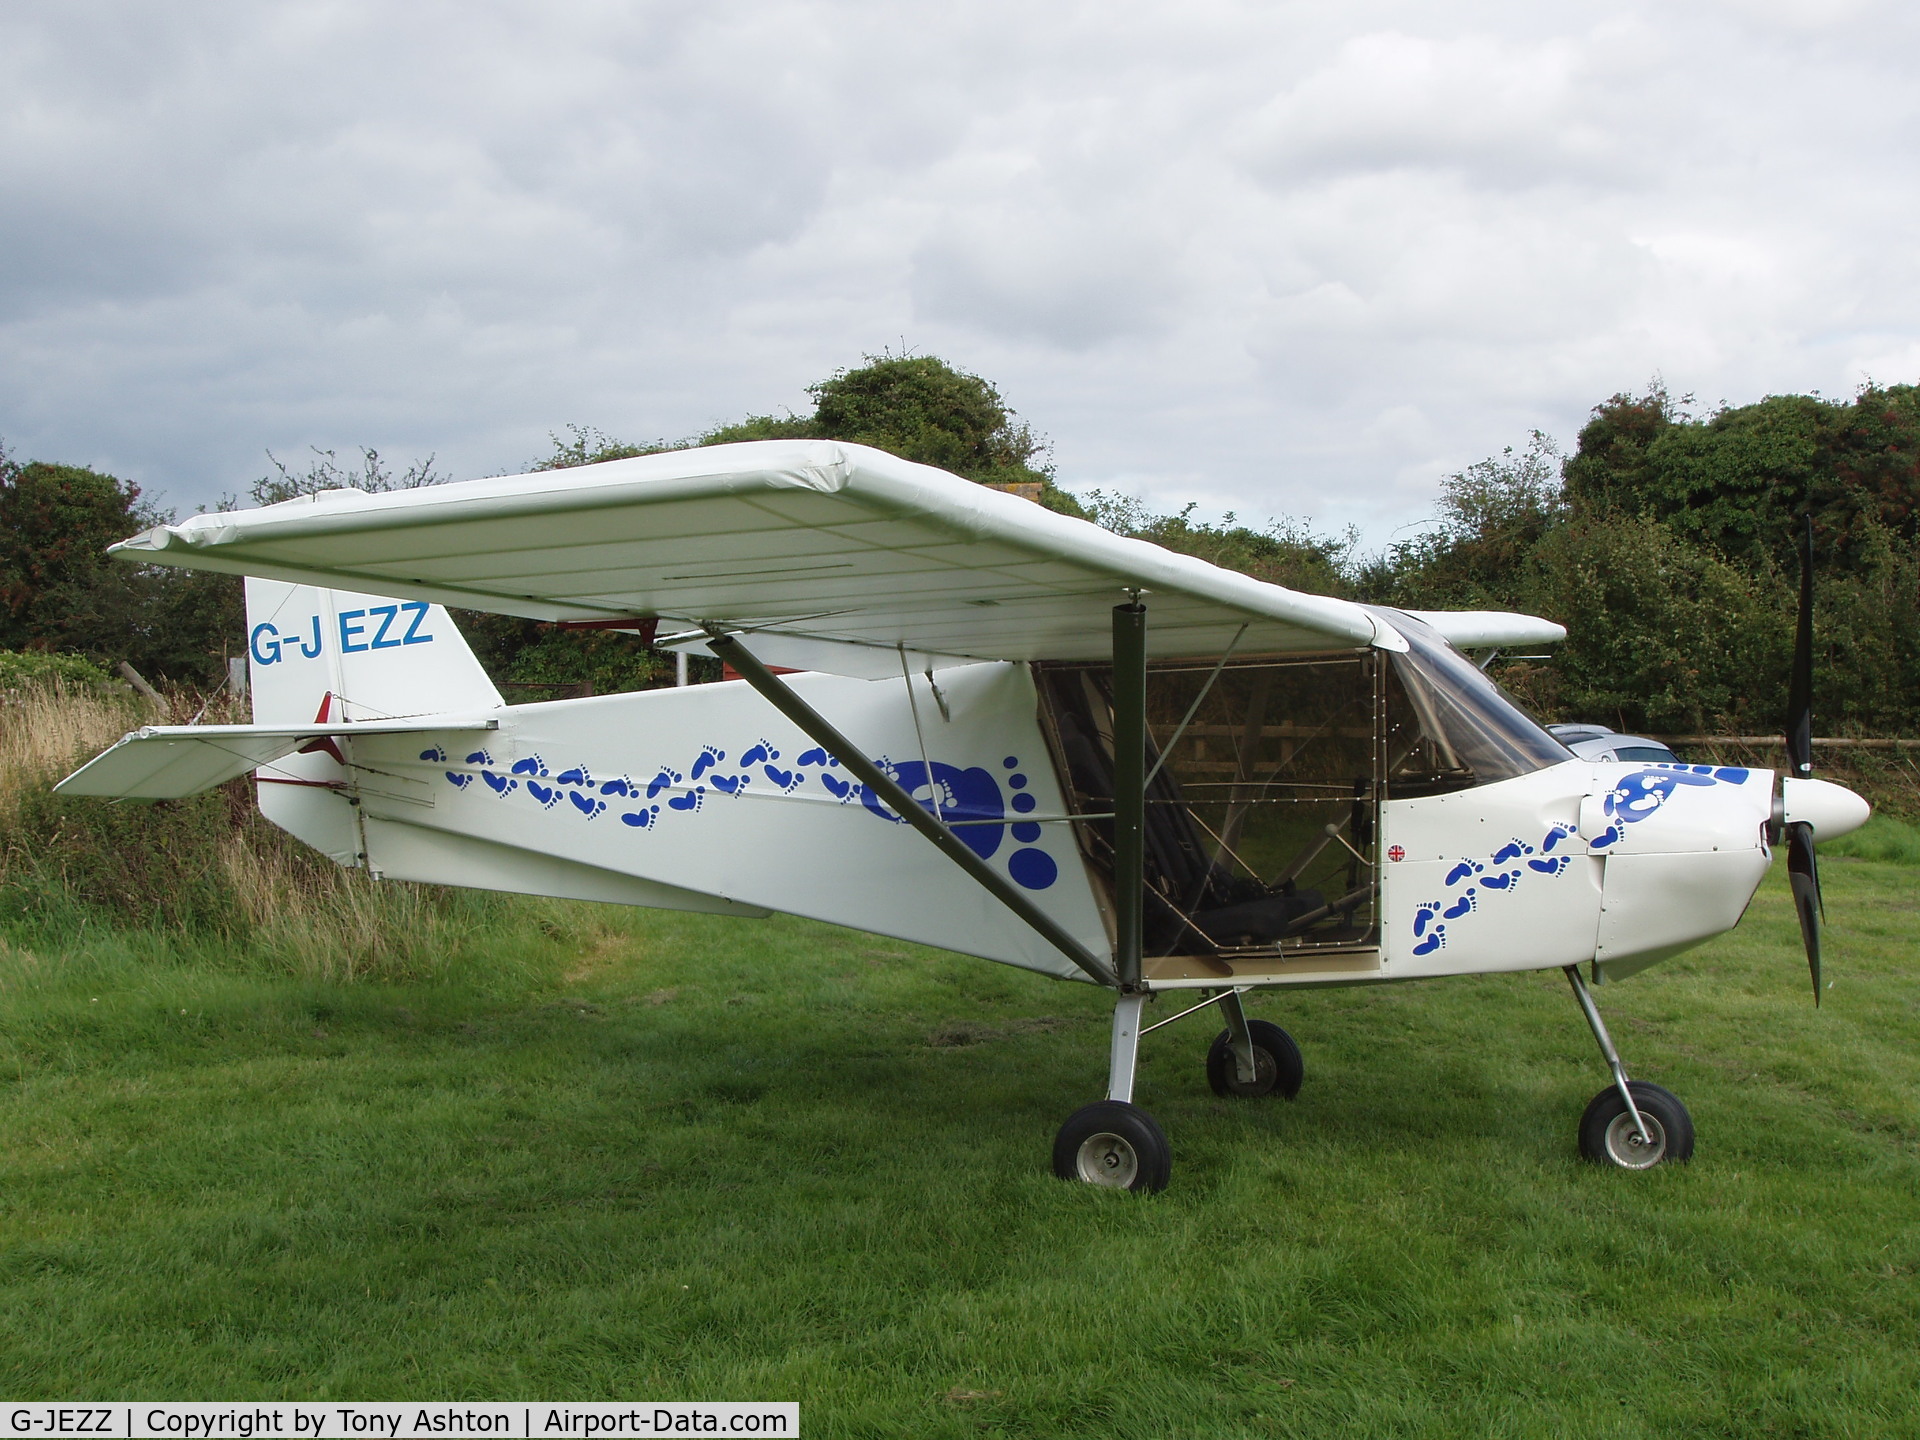 G-JEZZ, 2004 Skyranger 582(1) C/N BMAA/HB/368, G-JEZZ recovered and trimmed Aug 2008